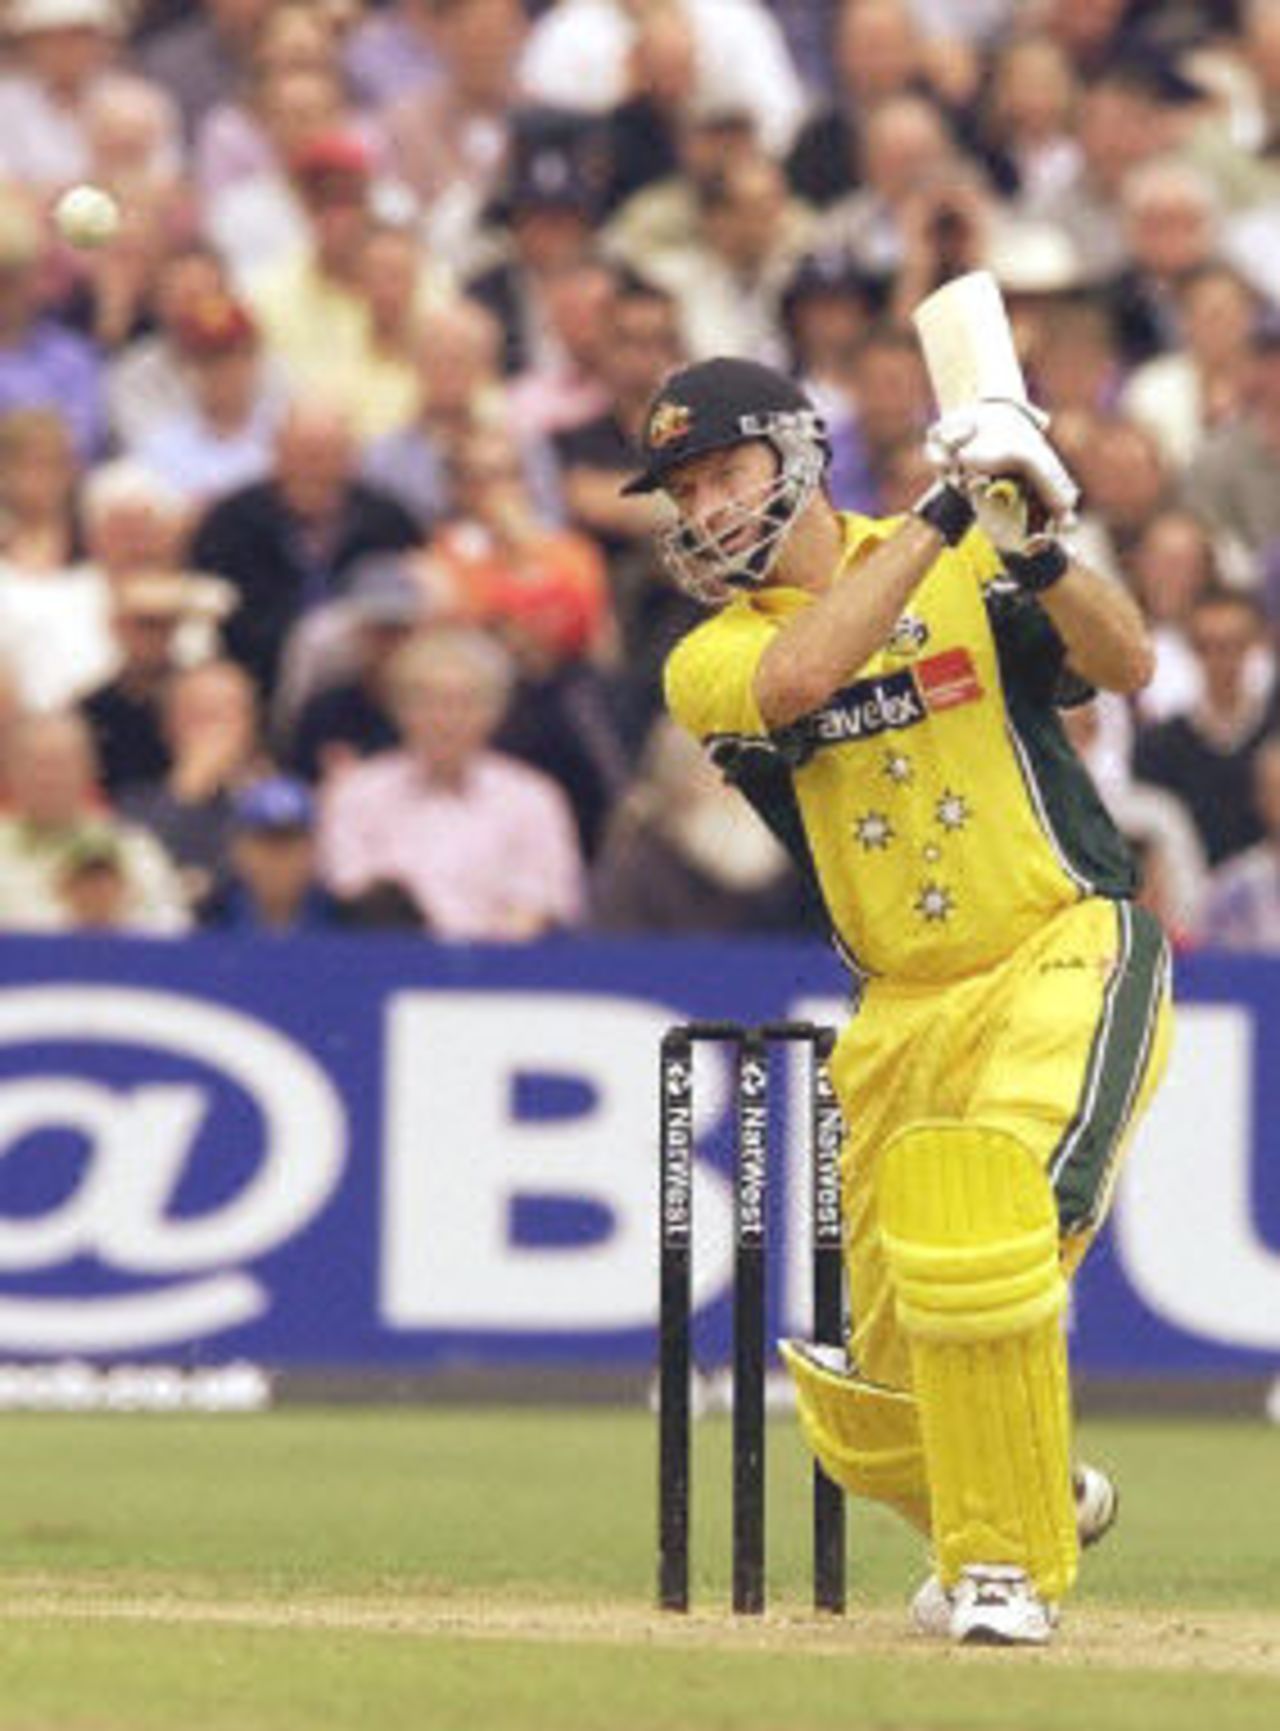 Steve Waugh drives a ball through the covers, 5th ODI at Old Trafford,14 June 2001.